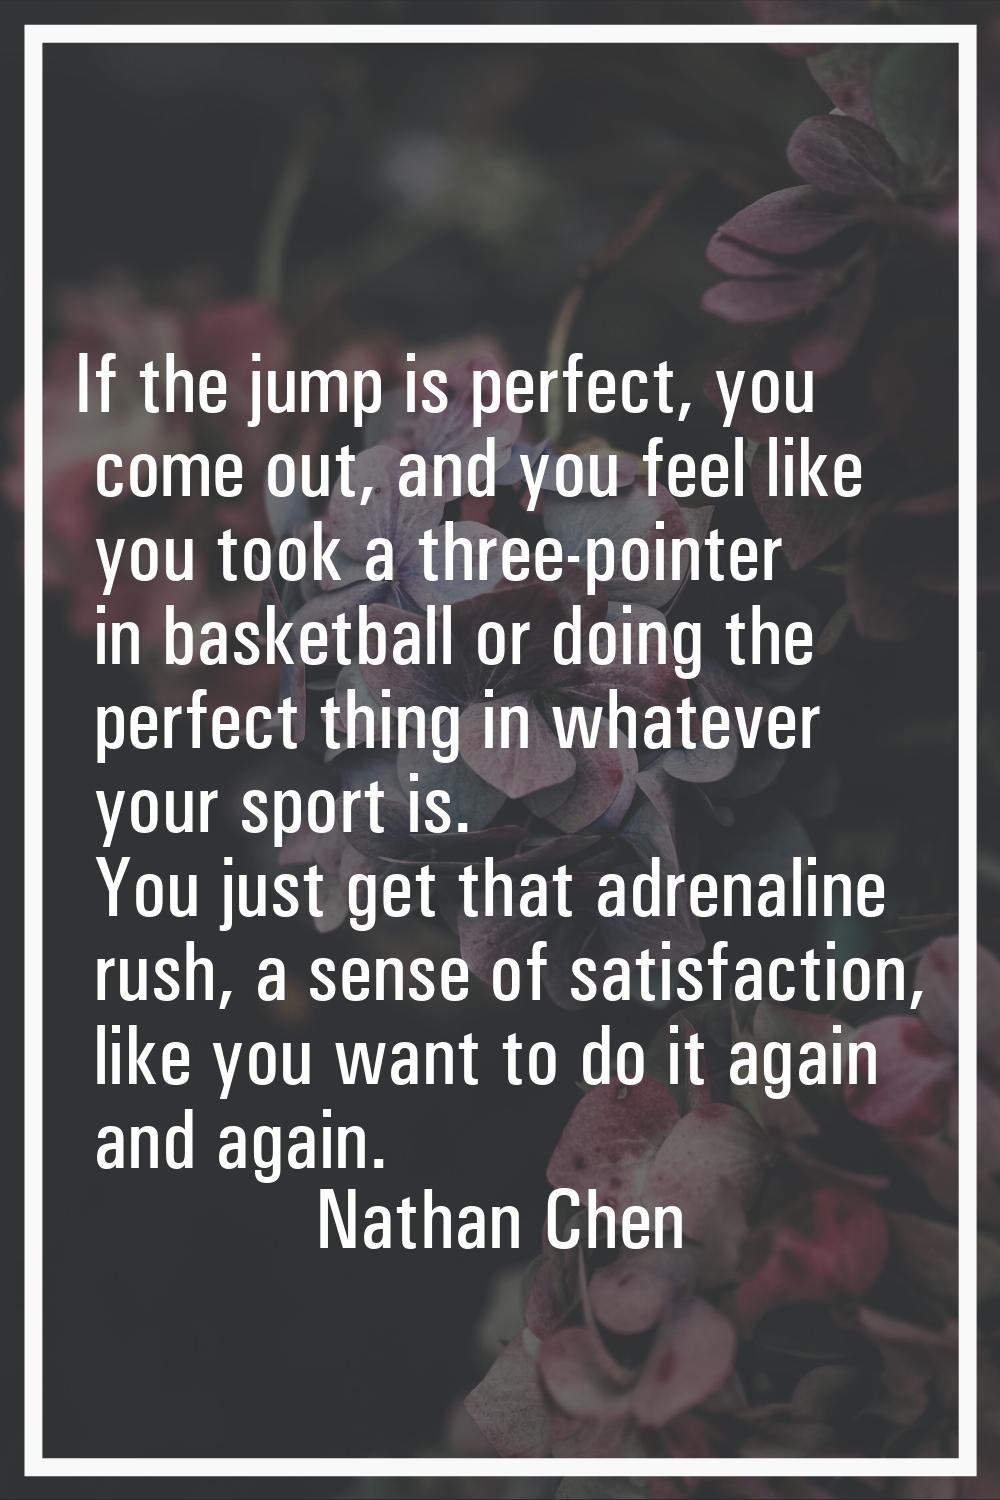 If the jump is perfect, you come out, and you feel like you took a three-pointer in basketball or d